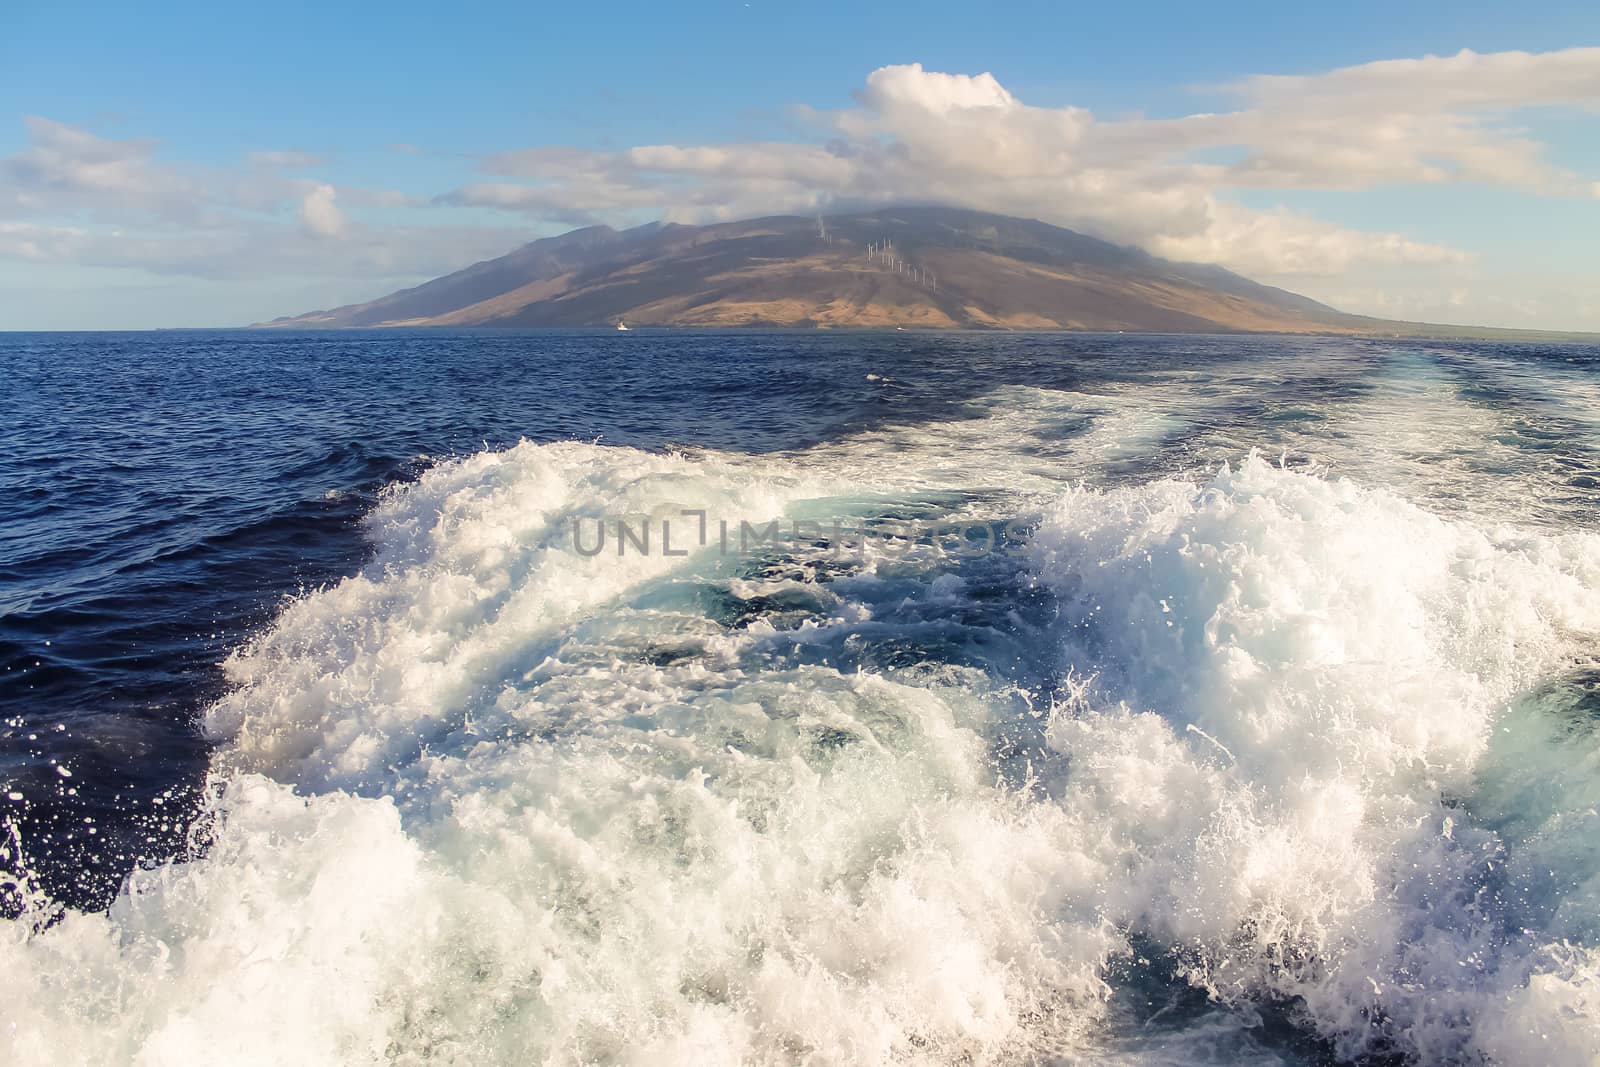 The island of Maui seenfrom the ocean over the wake of a motorboat